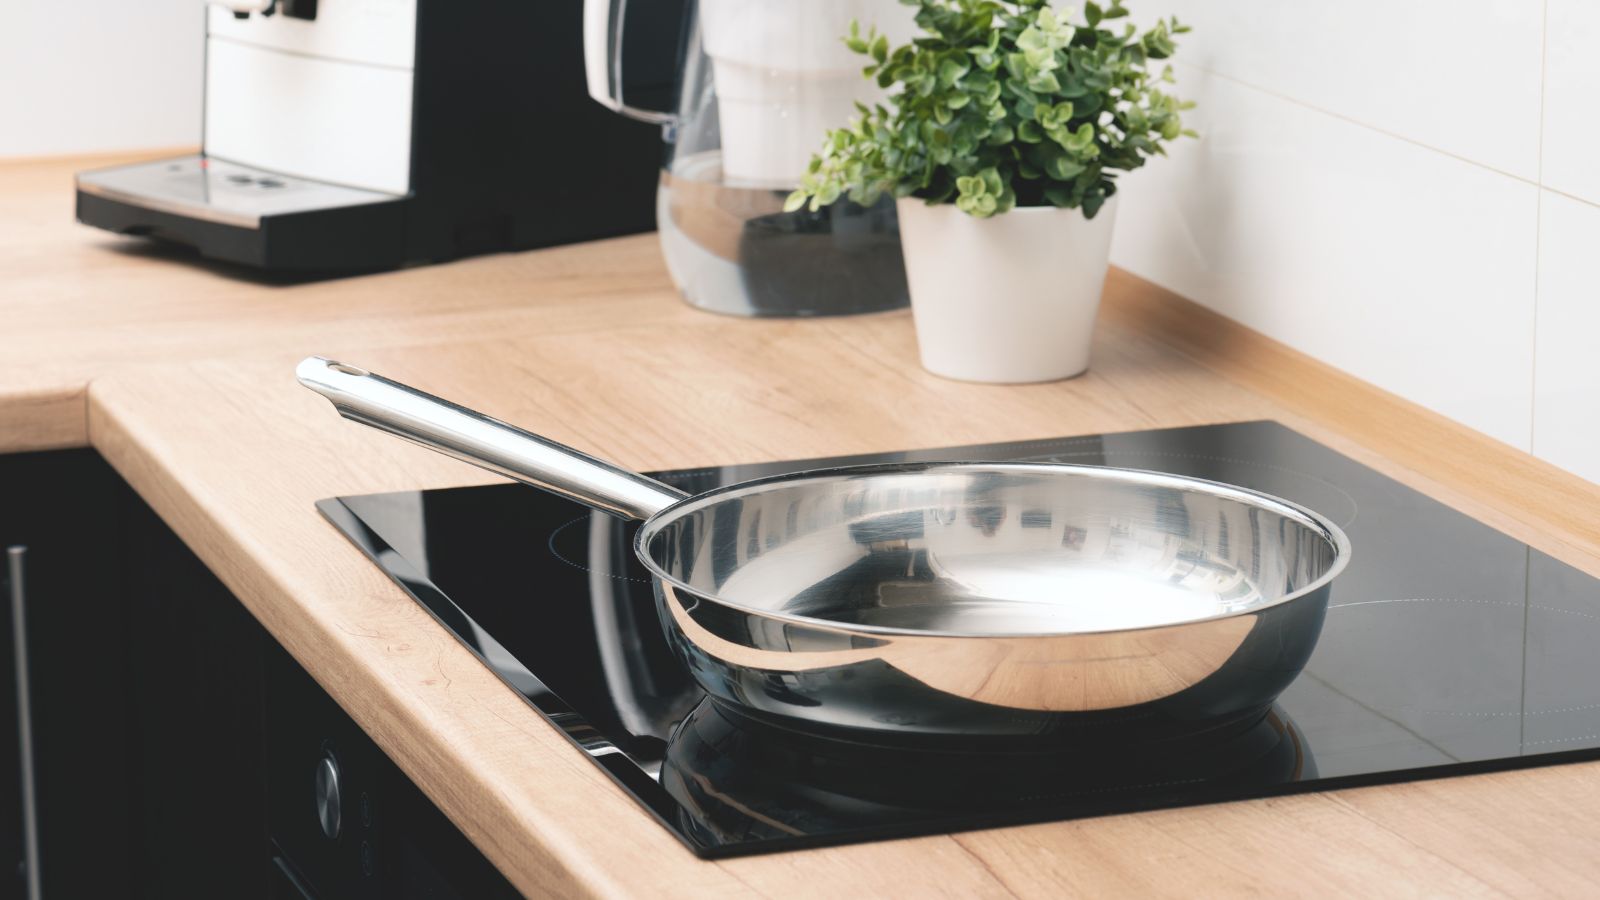 The difference between stovetop pans and oven-safe pans